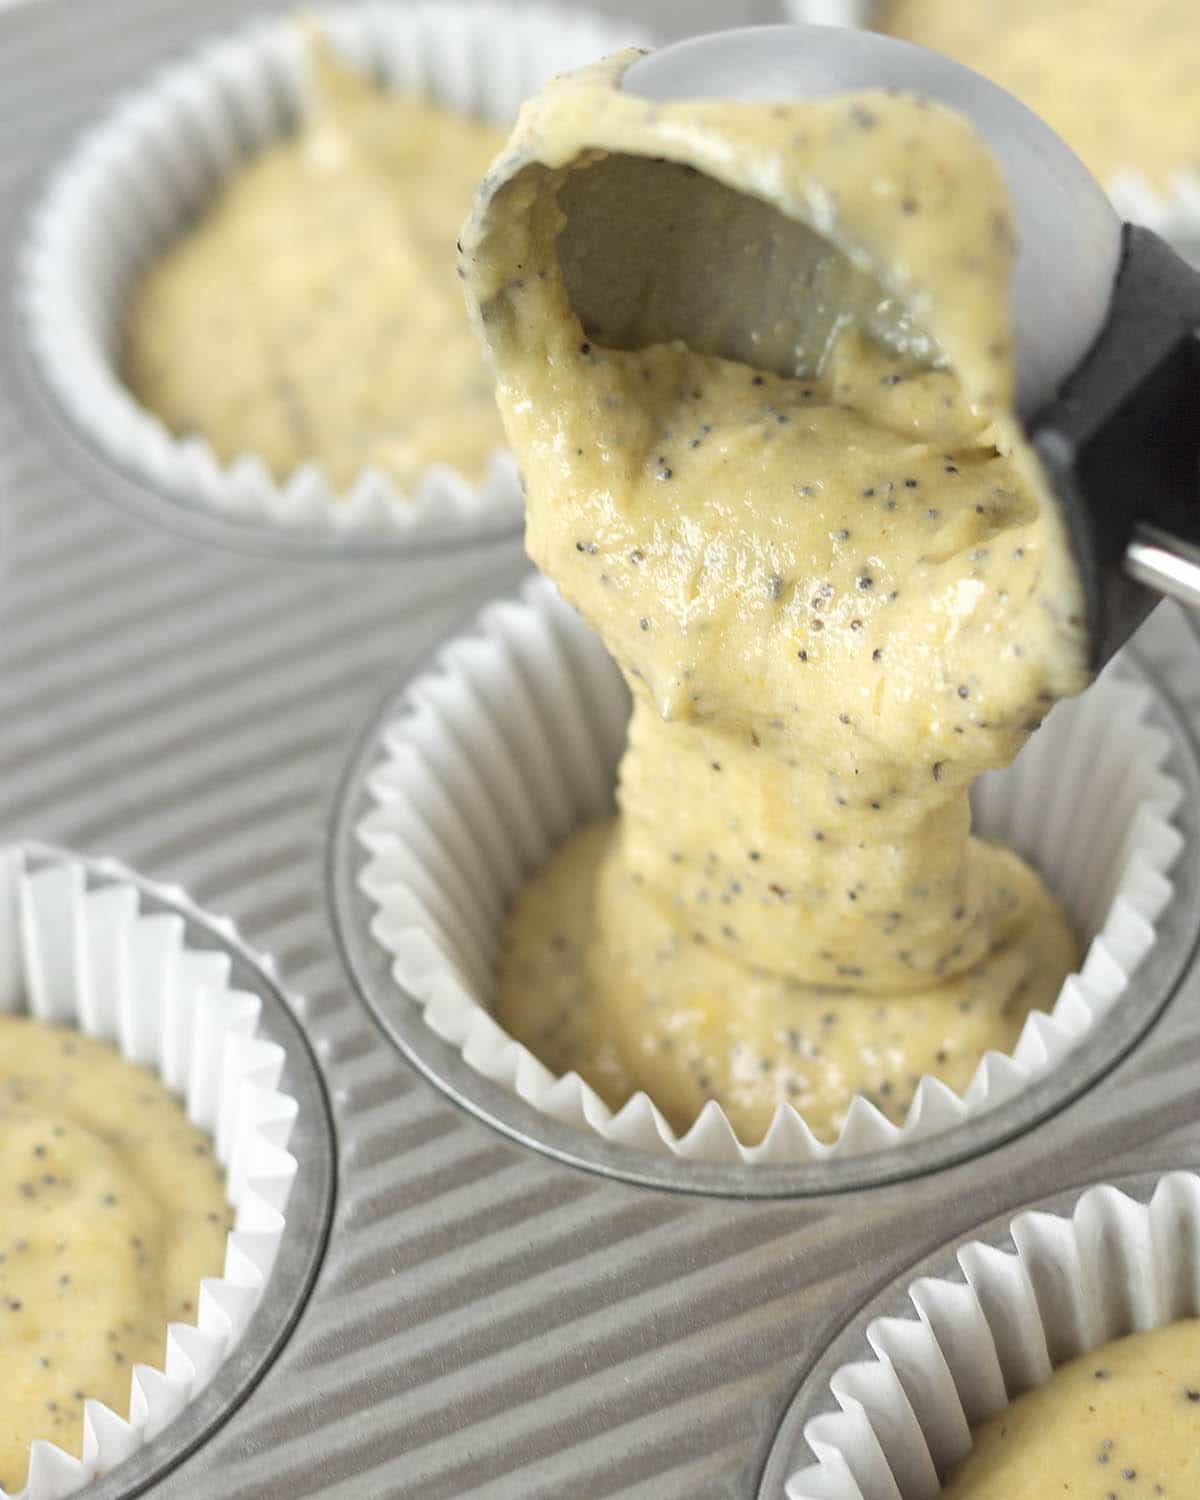 Muffin batter being poured by a scoop into a muffin cup that is in a muffin pan.